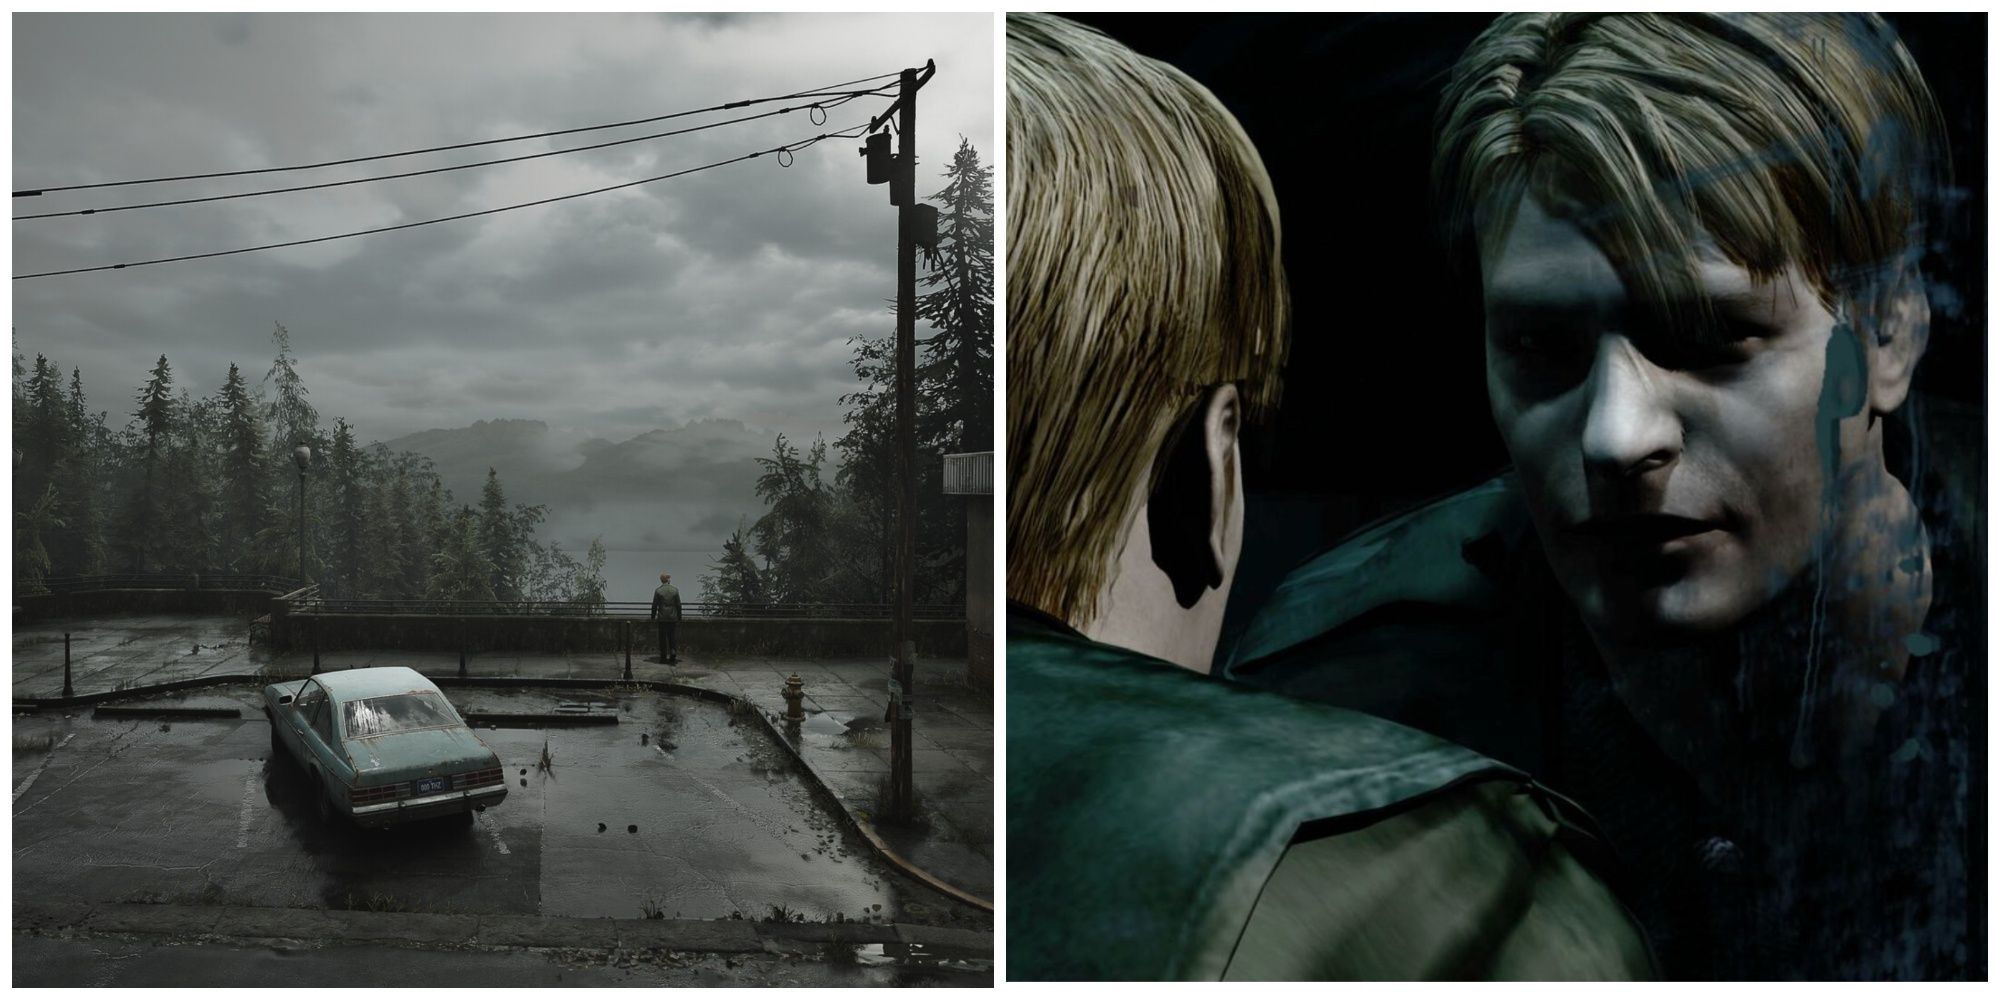 Silent Hill 2 collage